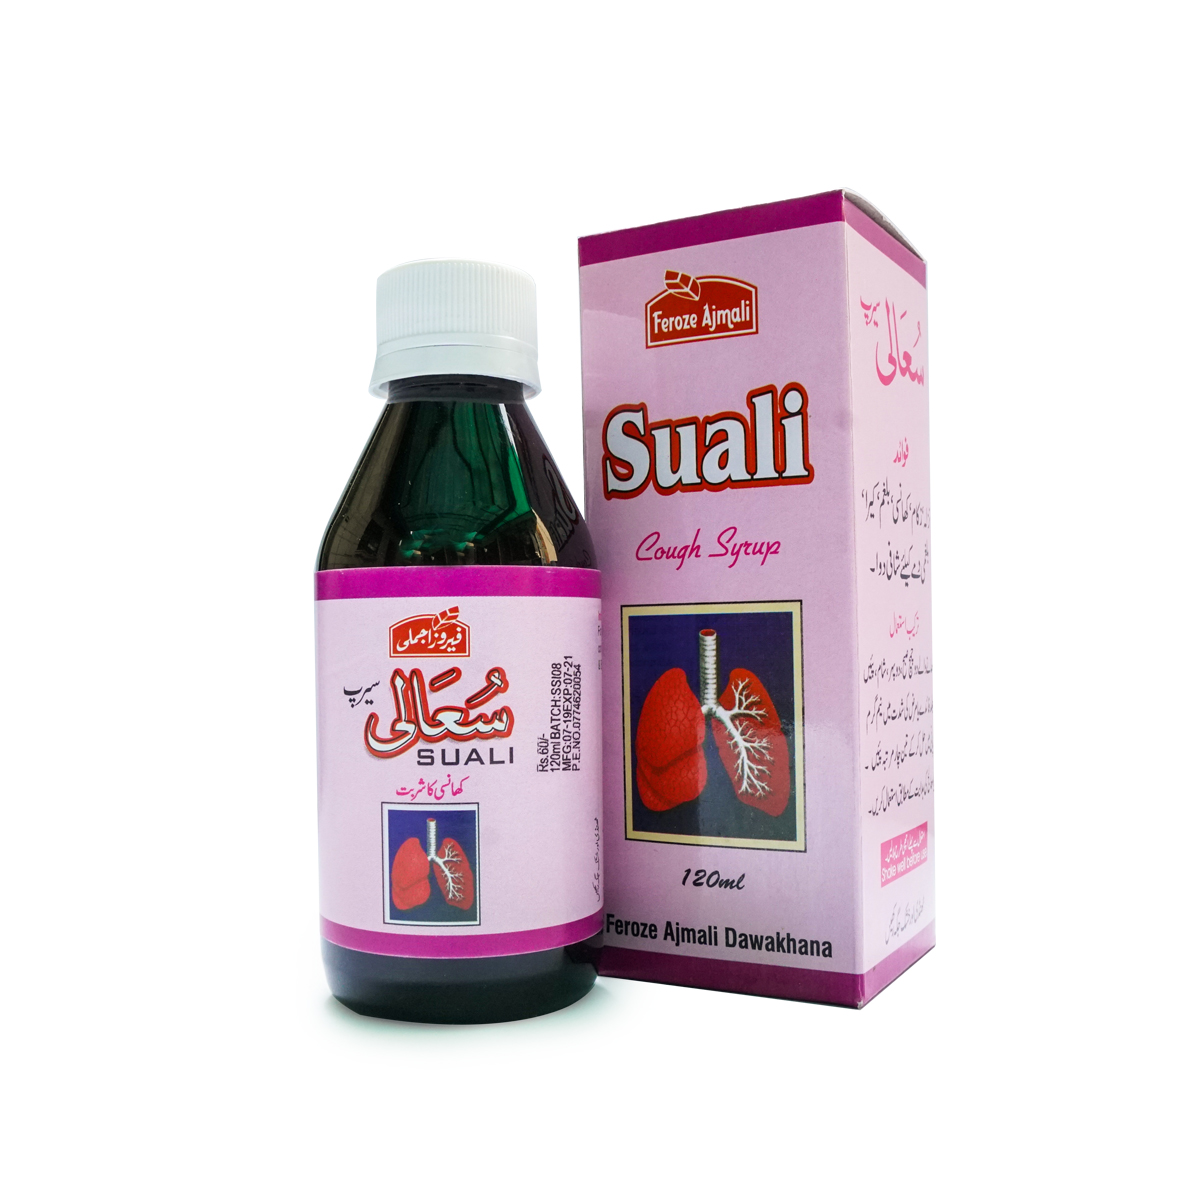 Suali Cough Syrup-image